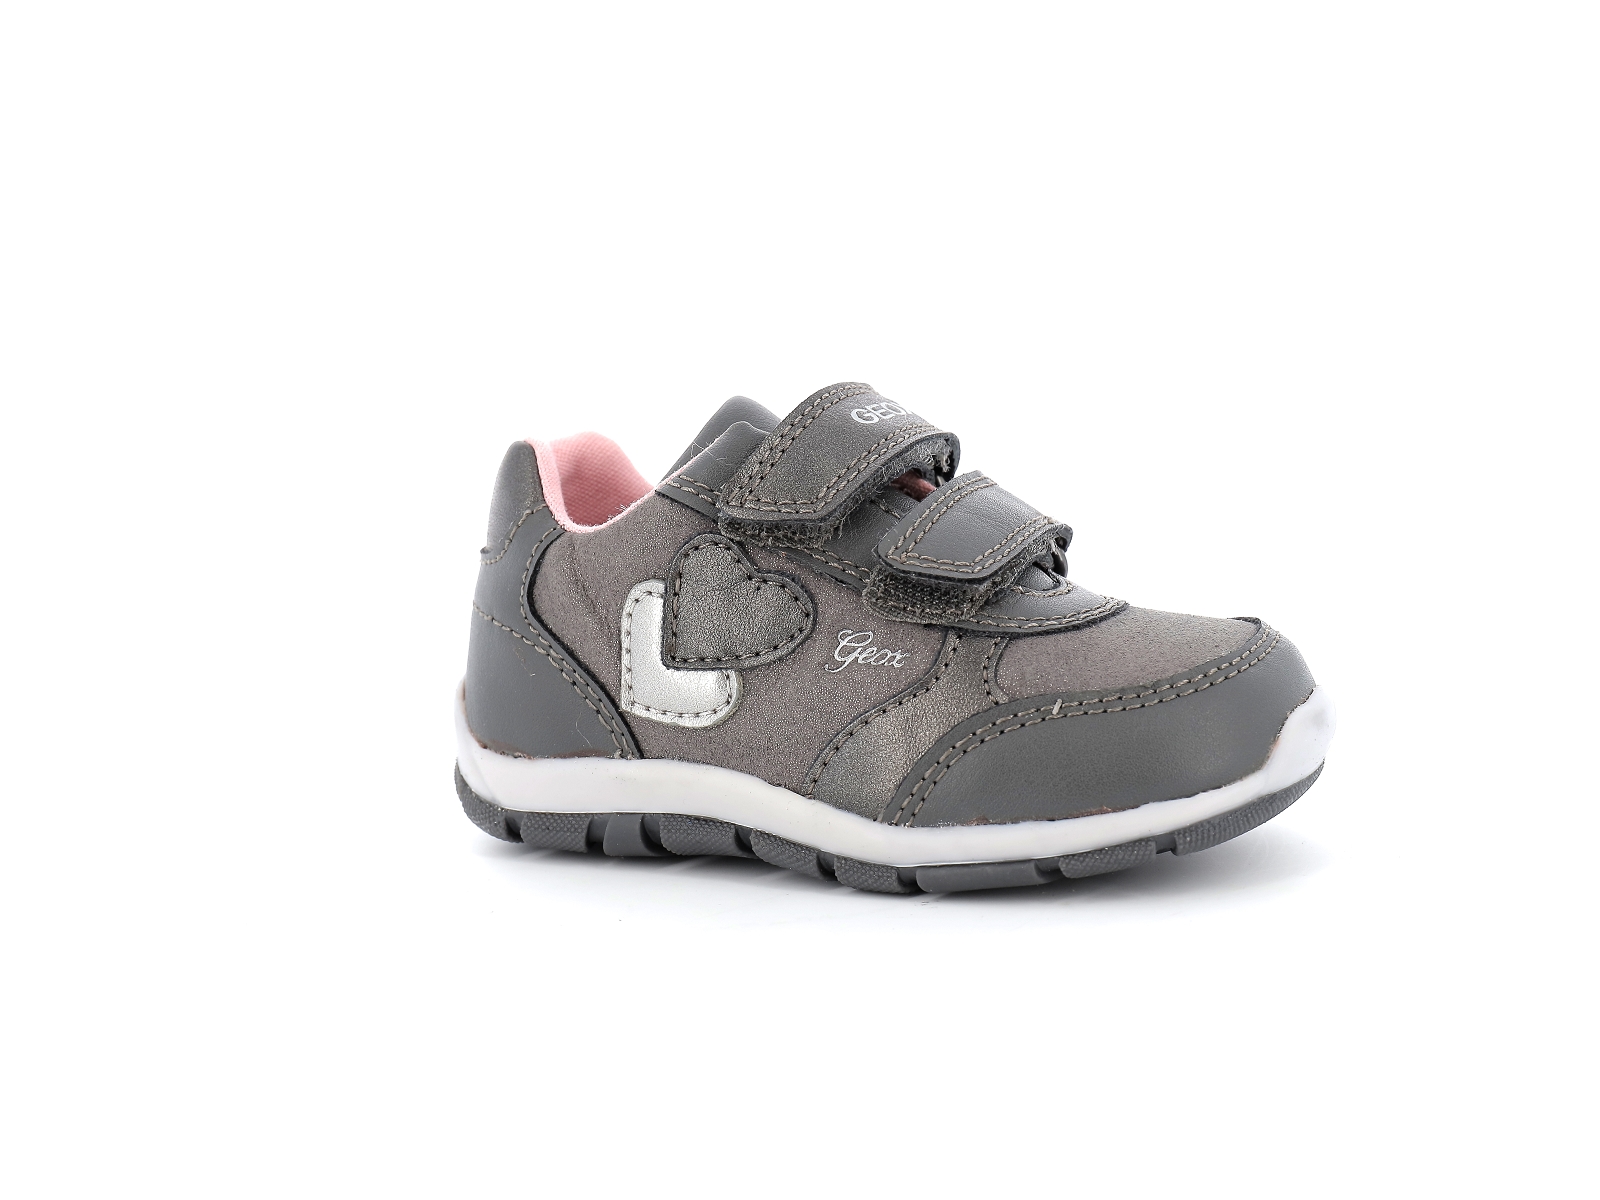 Chaussures Château | Geox sneakers geoheira b163ya 26 gris bebe fille